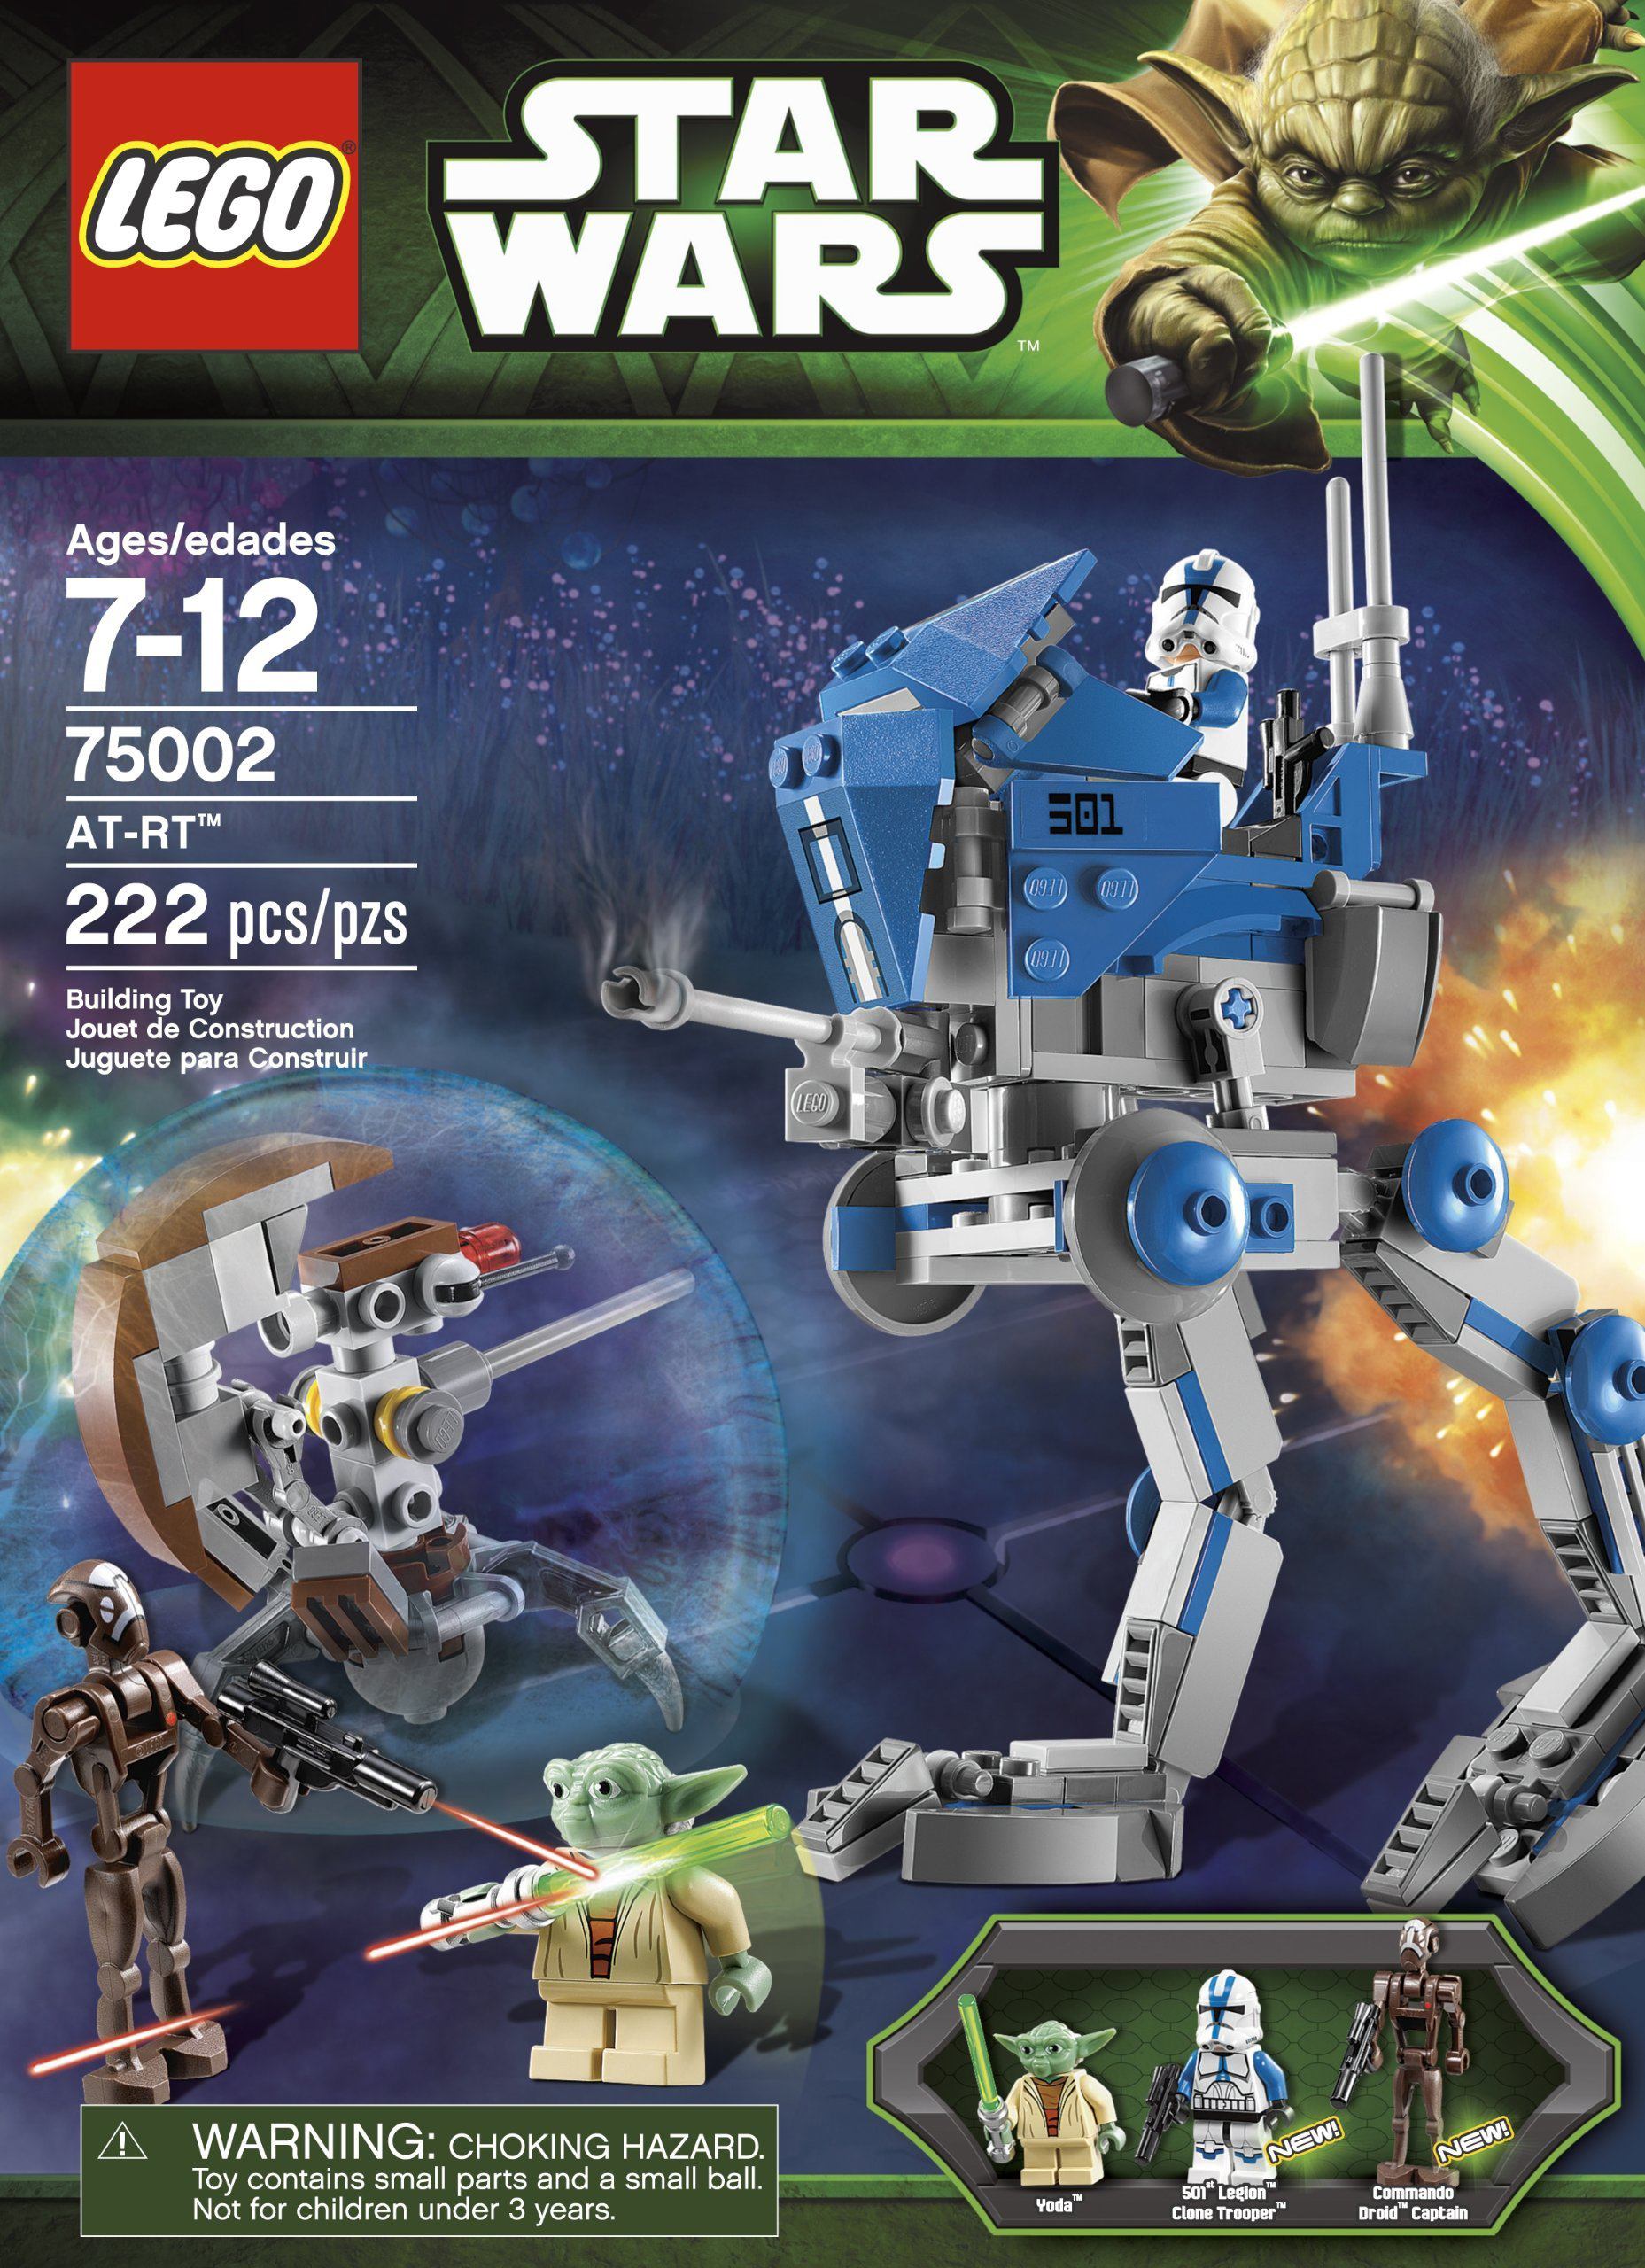 LEGO Star Wars 2013 Pictures and Rumors - LEGO Star Wars - Eurobricks ...